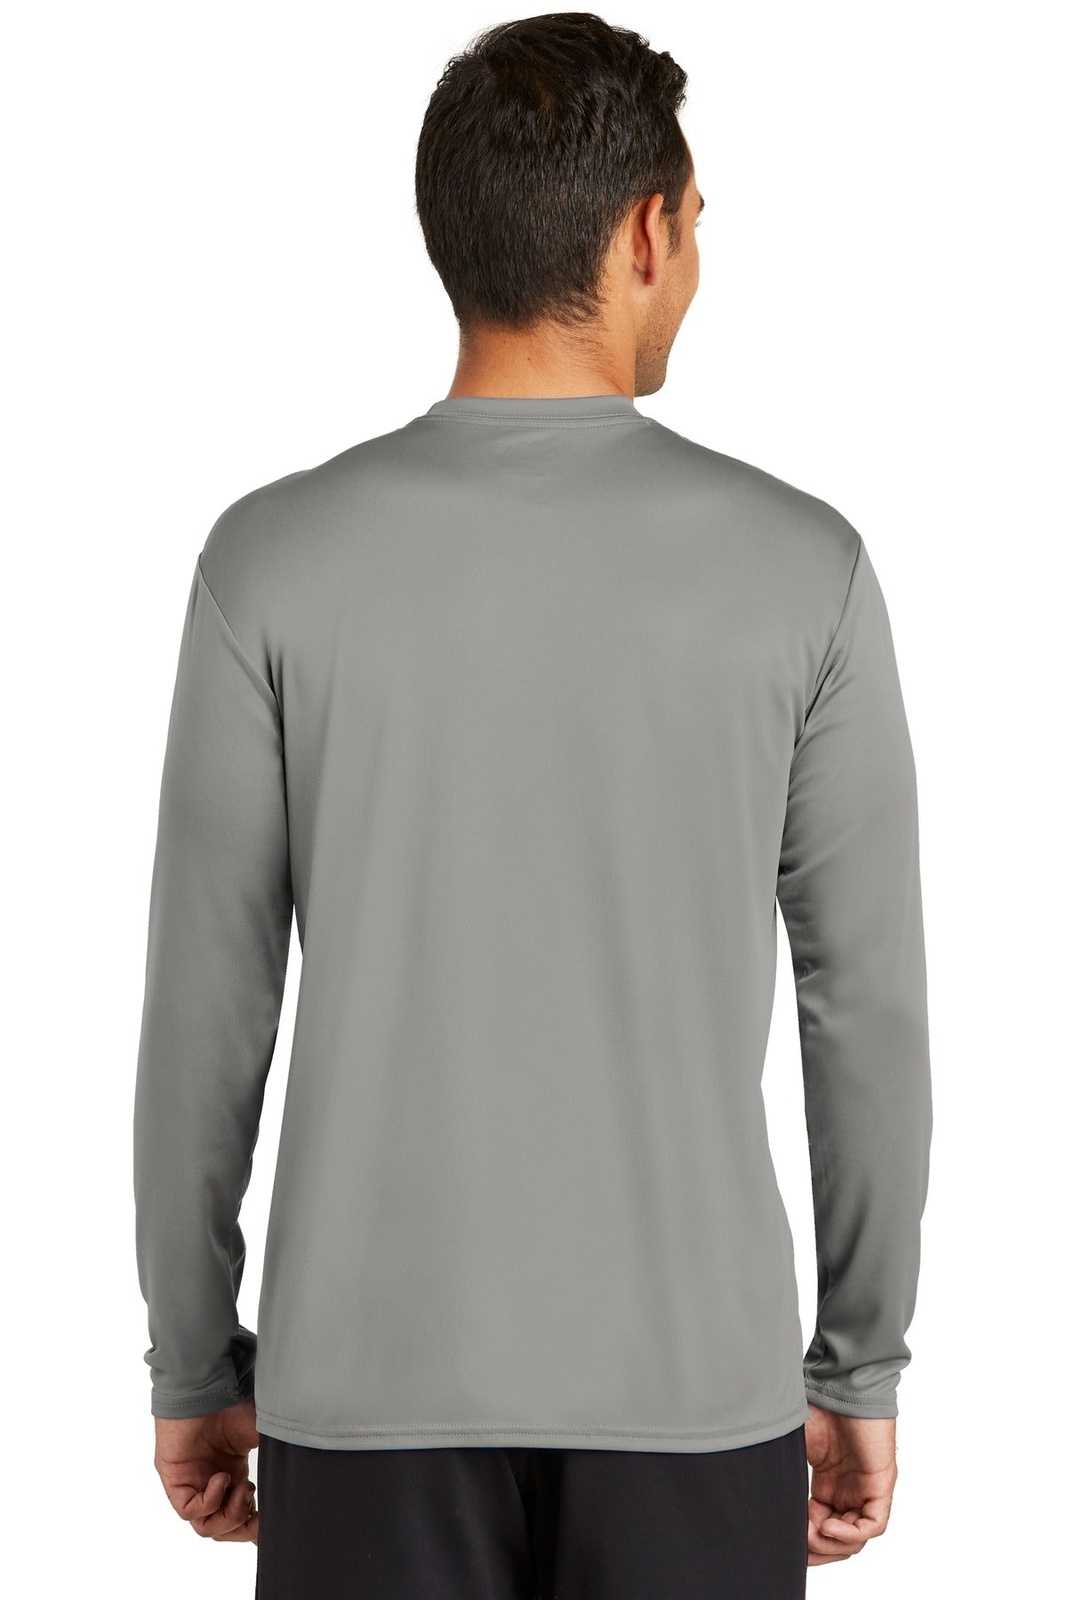 Port & Company PC380LS Long Sleeve Performance Tee - Gray Concrete - HIT a Double - 1